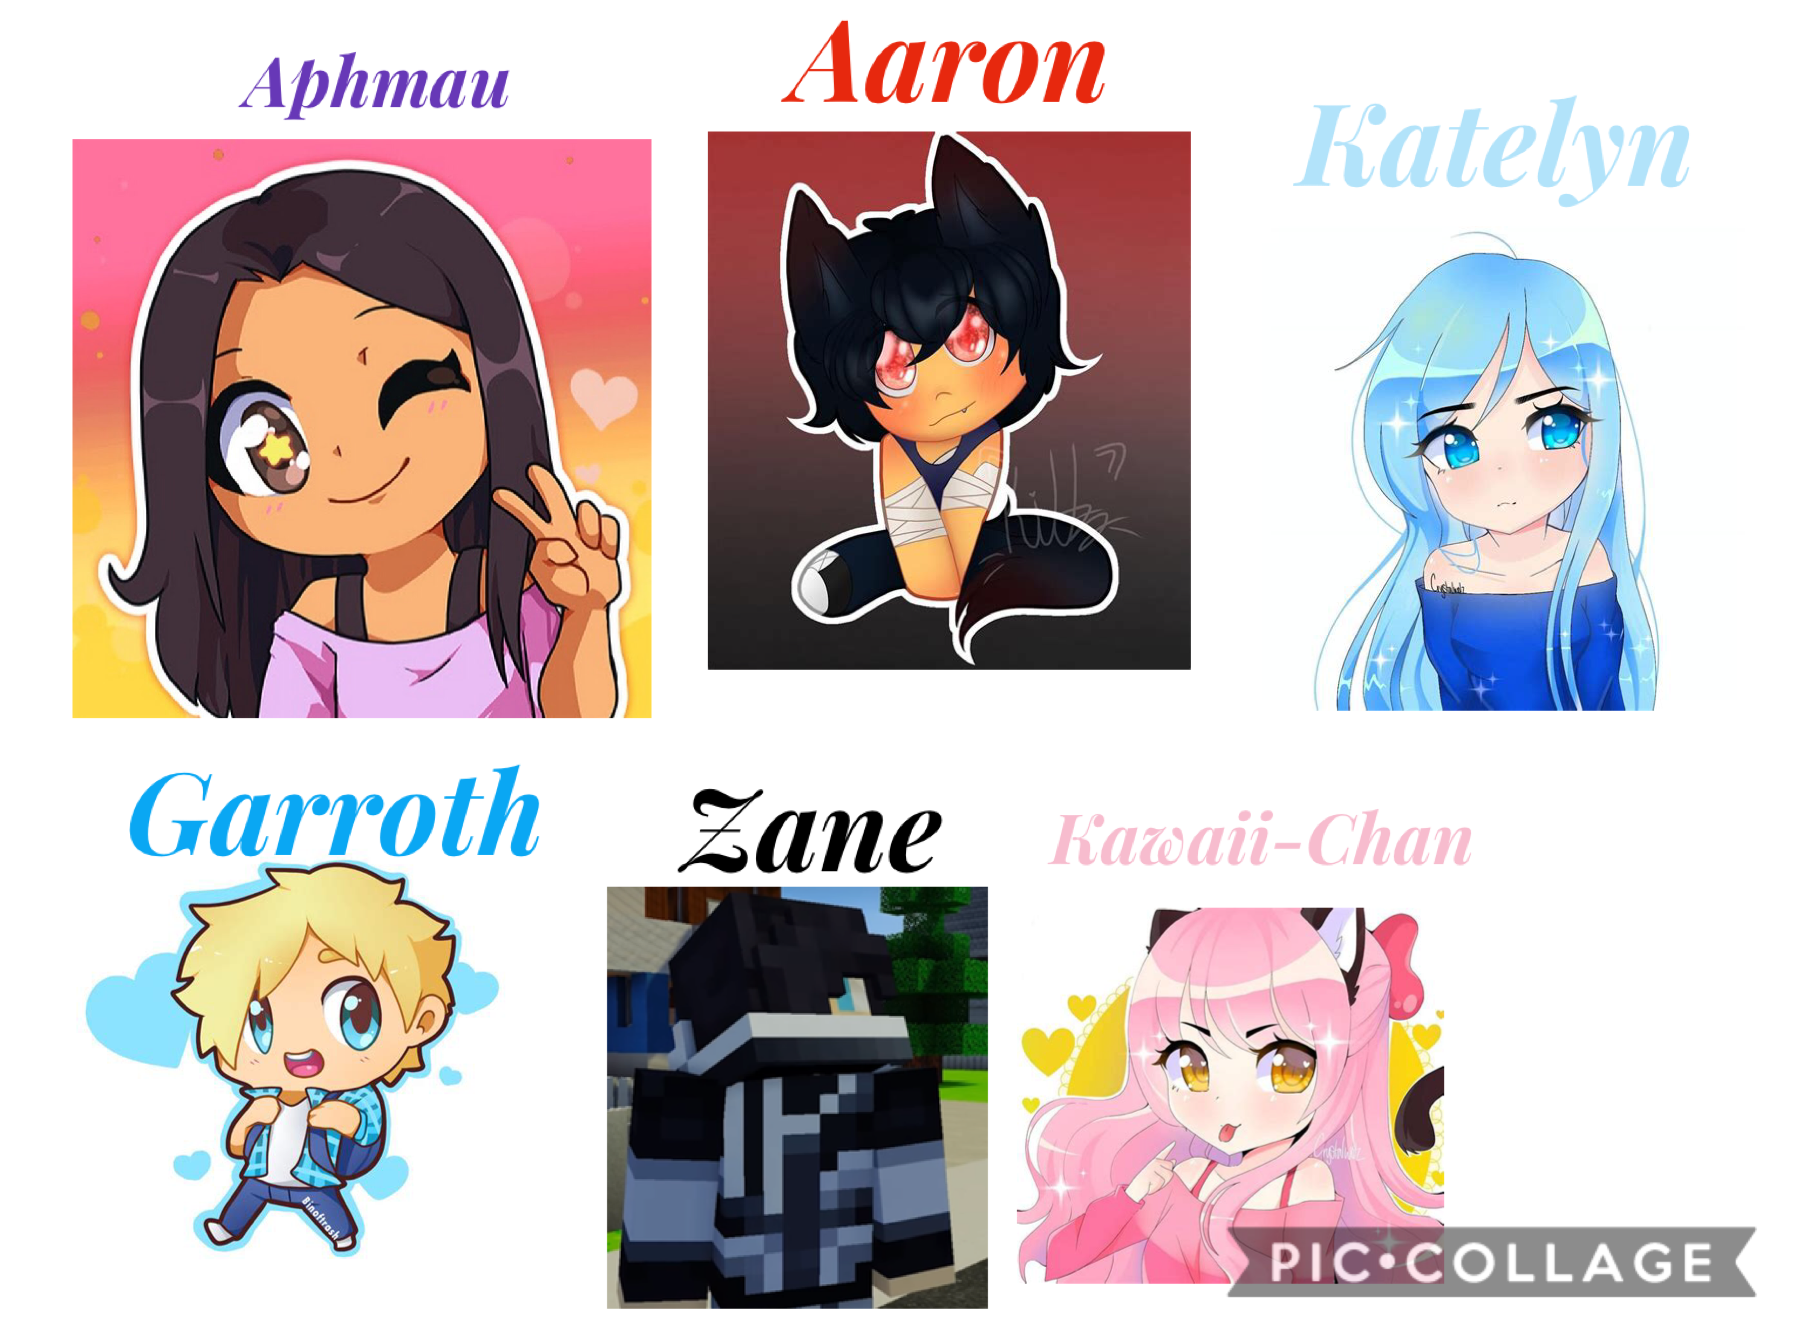 Some aphmau characters 
Part 1